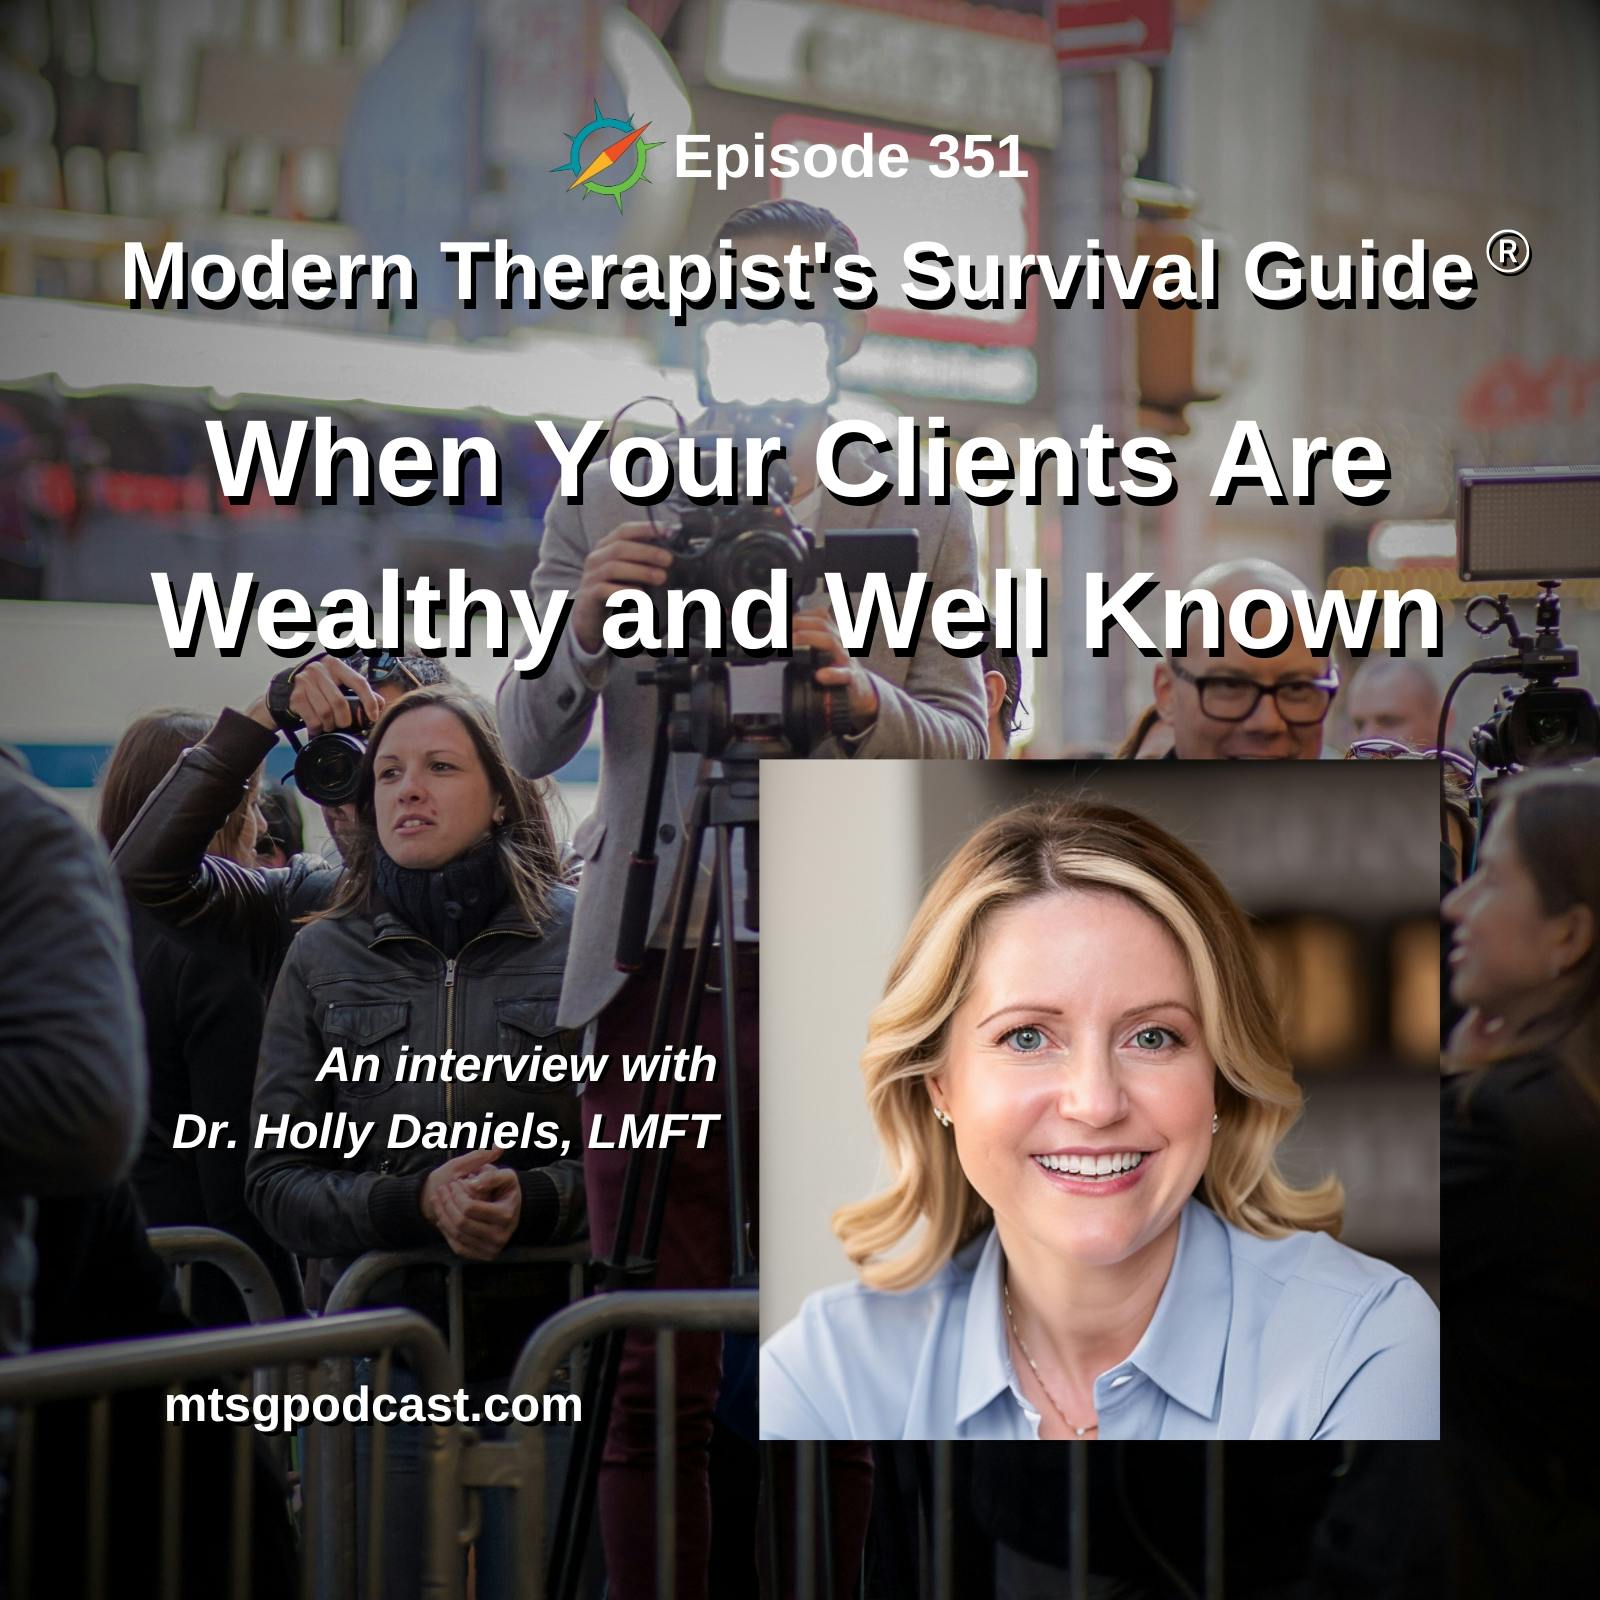 When Your Clients are Wealthy and Well Known: An interview with Dr. Holly Daniels, LMFT